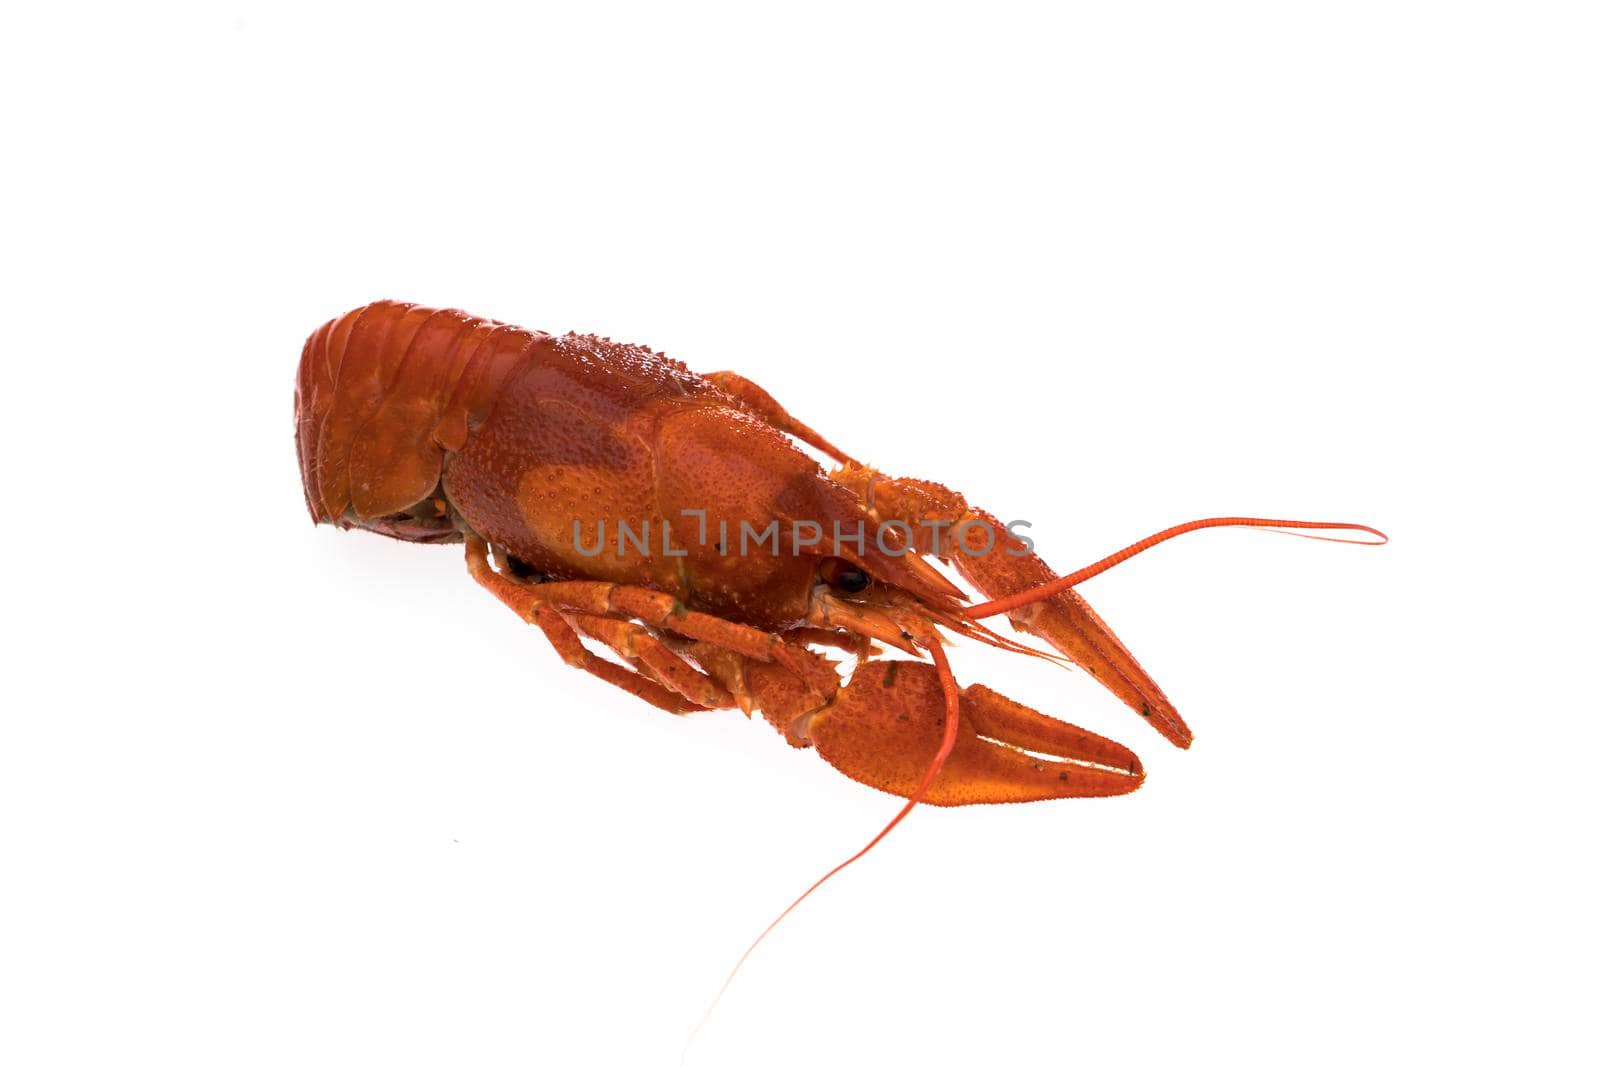 Crayfish, boiled, cooked, red on white background isolated